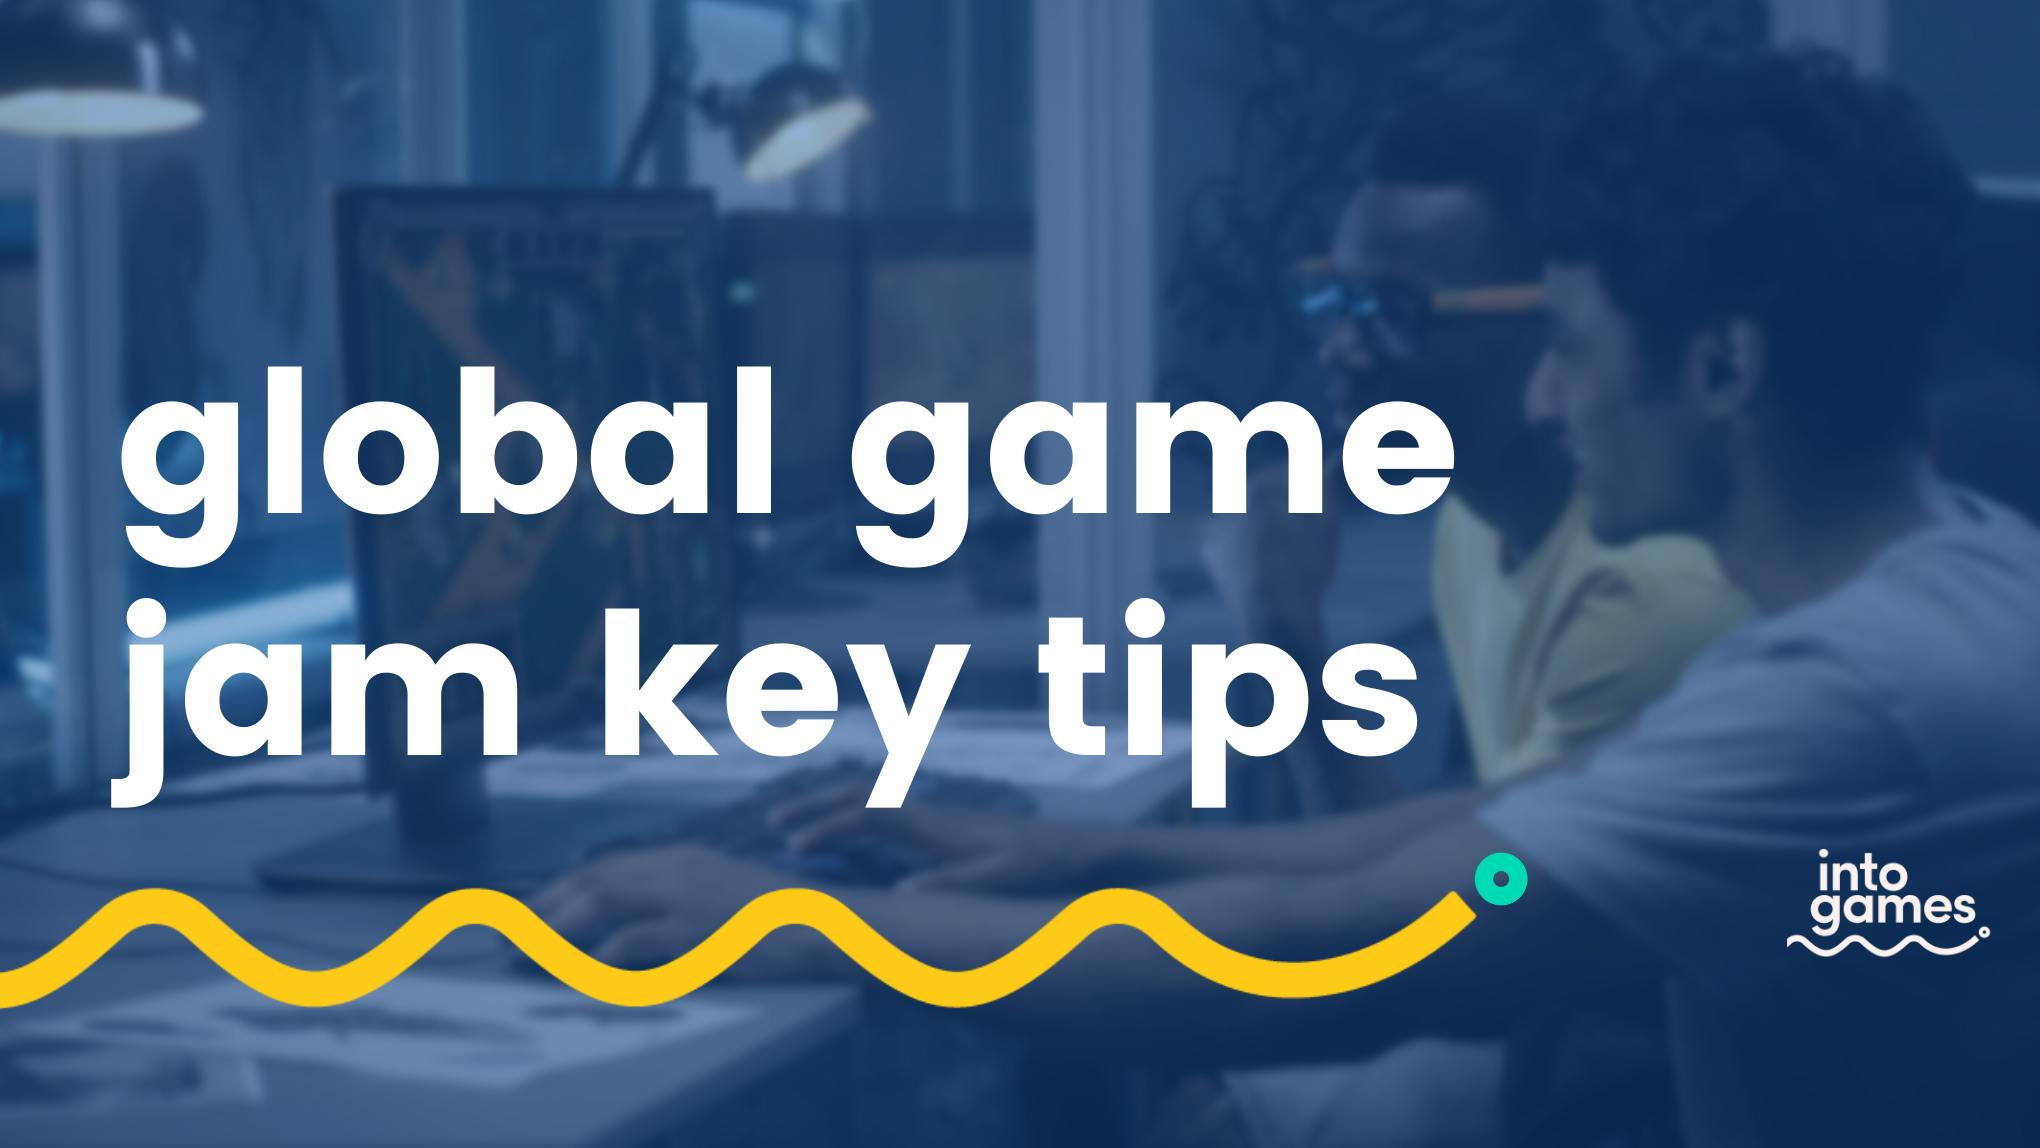 Key Tips to Prepare You for Global Game Jam